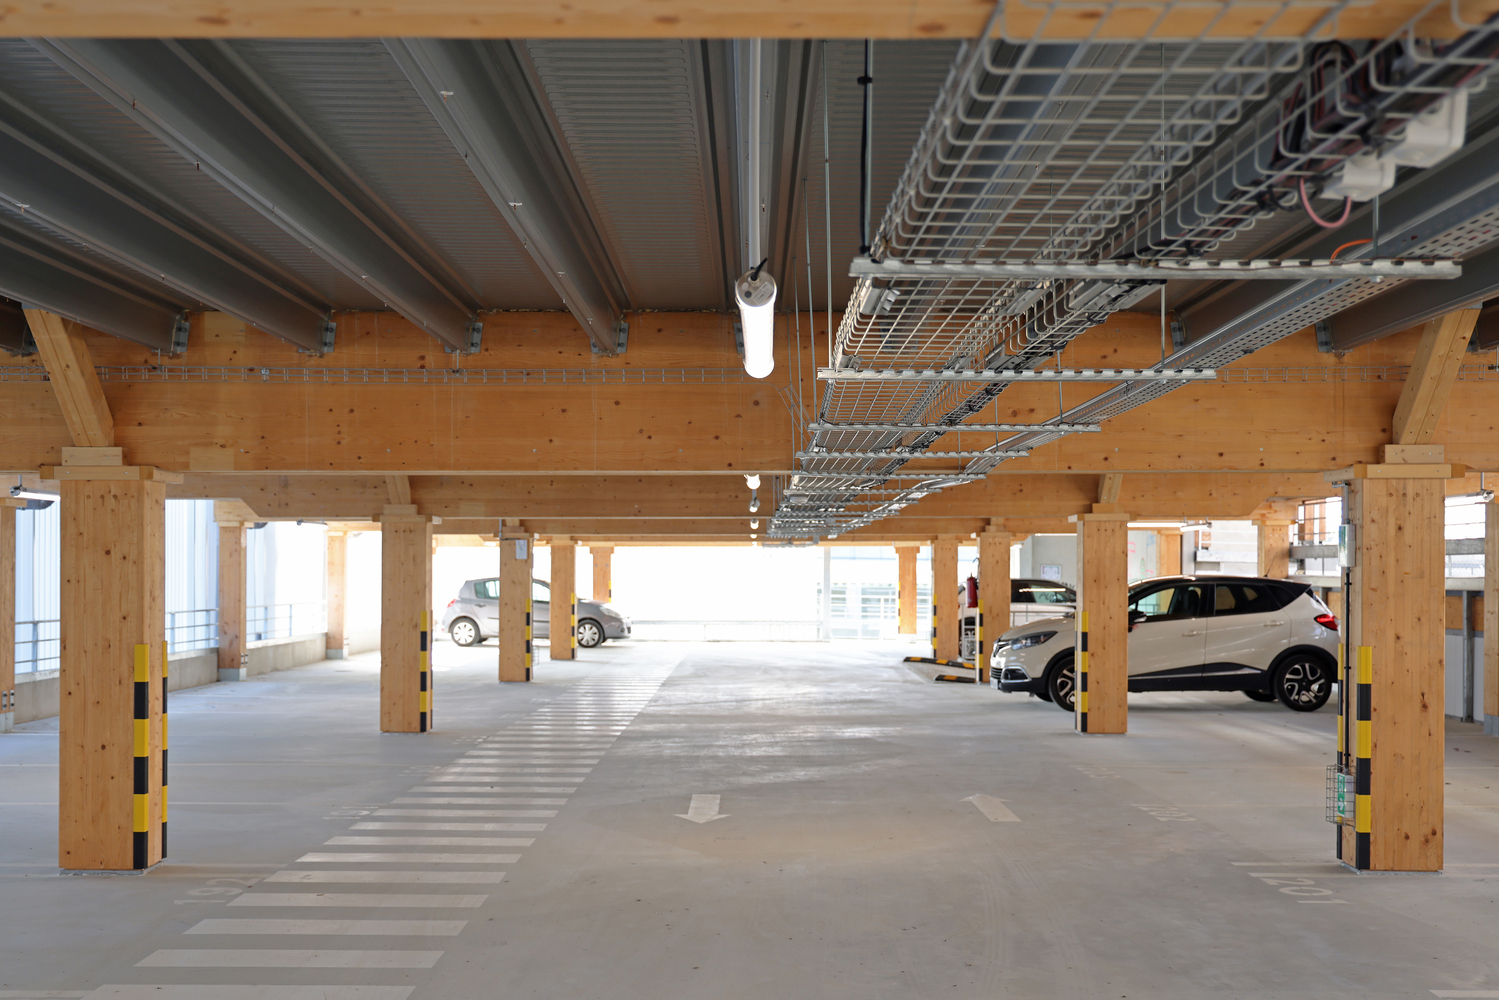 This parking building can accommodate 240 cars